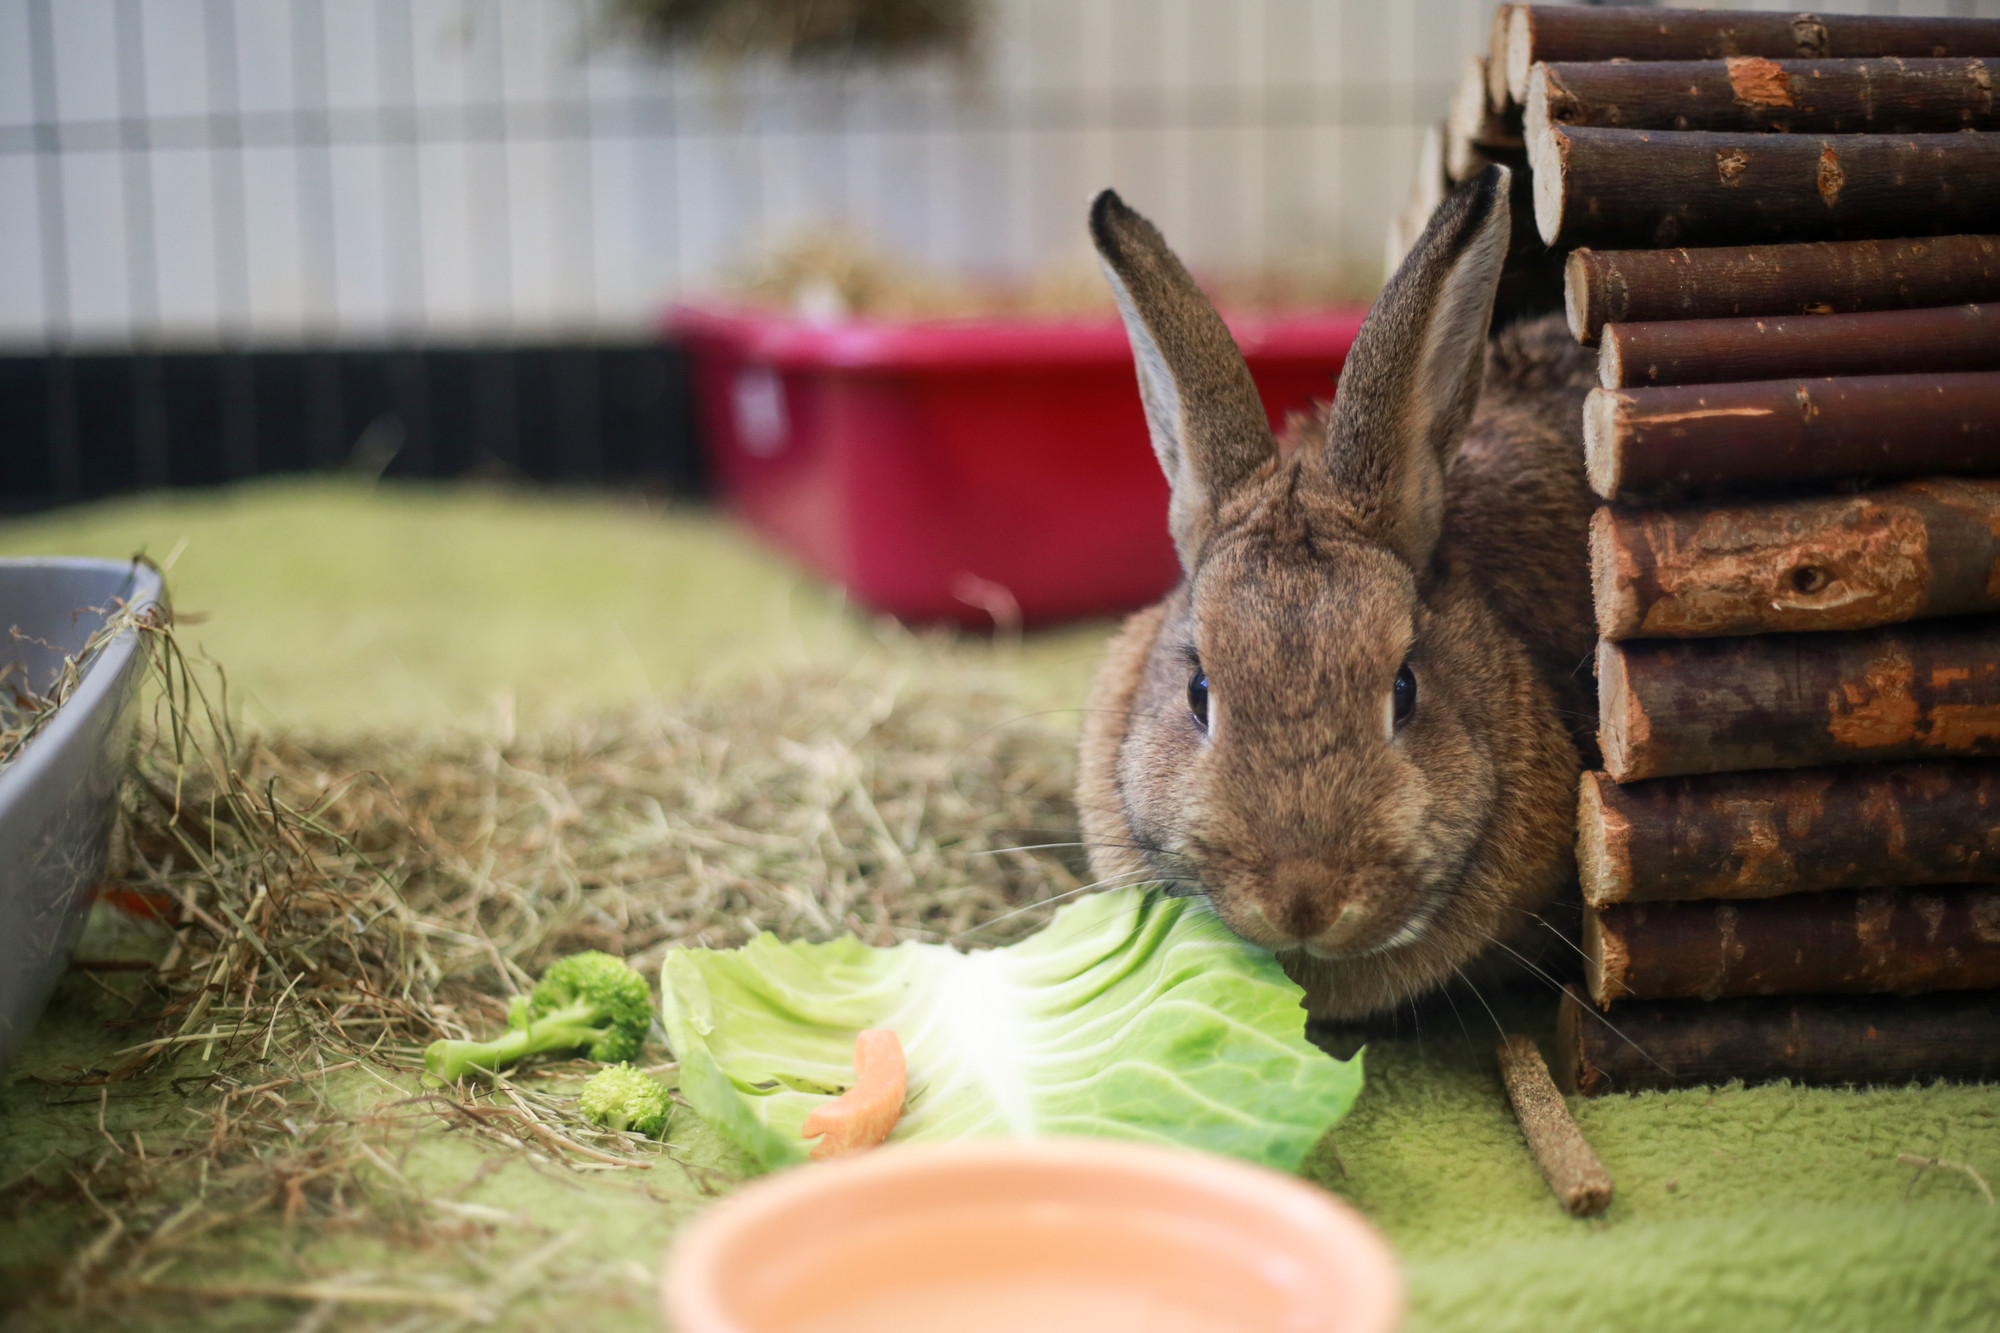 Jan, the brown rabbit eating some cabbage